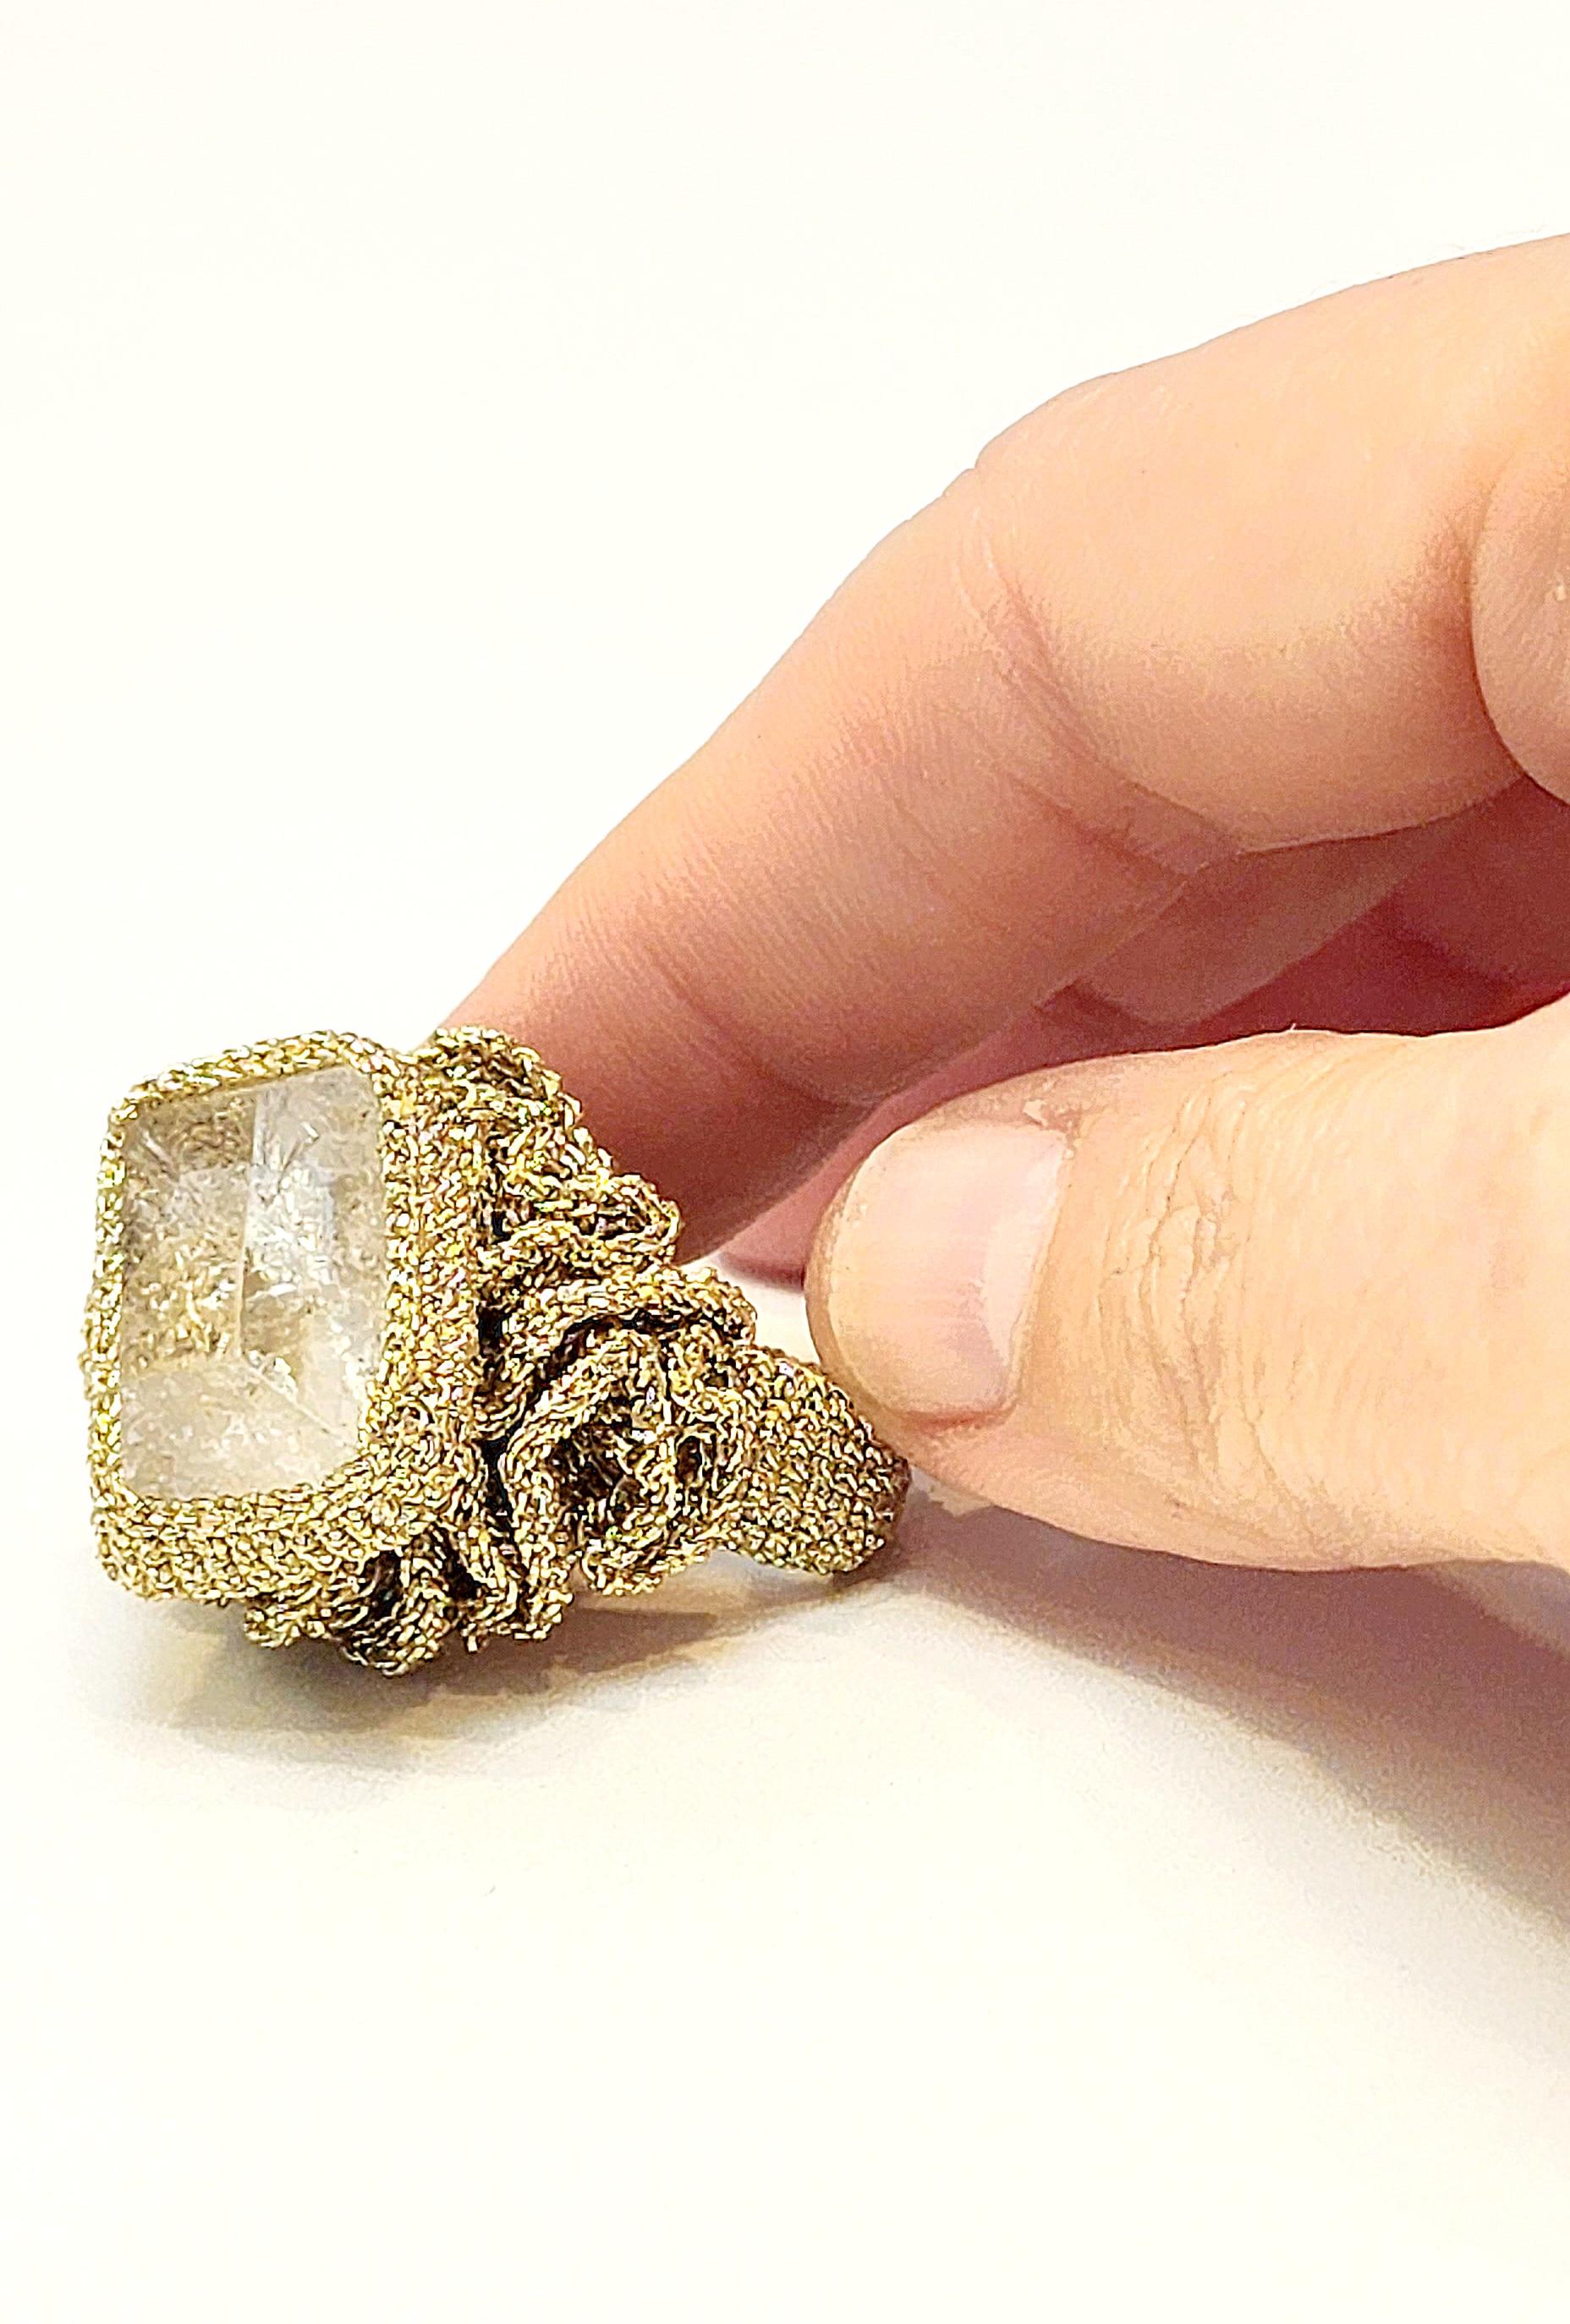 One of a kind handcrafted Crochet ring. This is a unique statement Cocktail ring. A beautiful clear rough baguette shaped Crystal Stone Crochet on top of a wavelike round design. The ring is very light as it is Crochet with Golden smooth passing